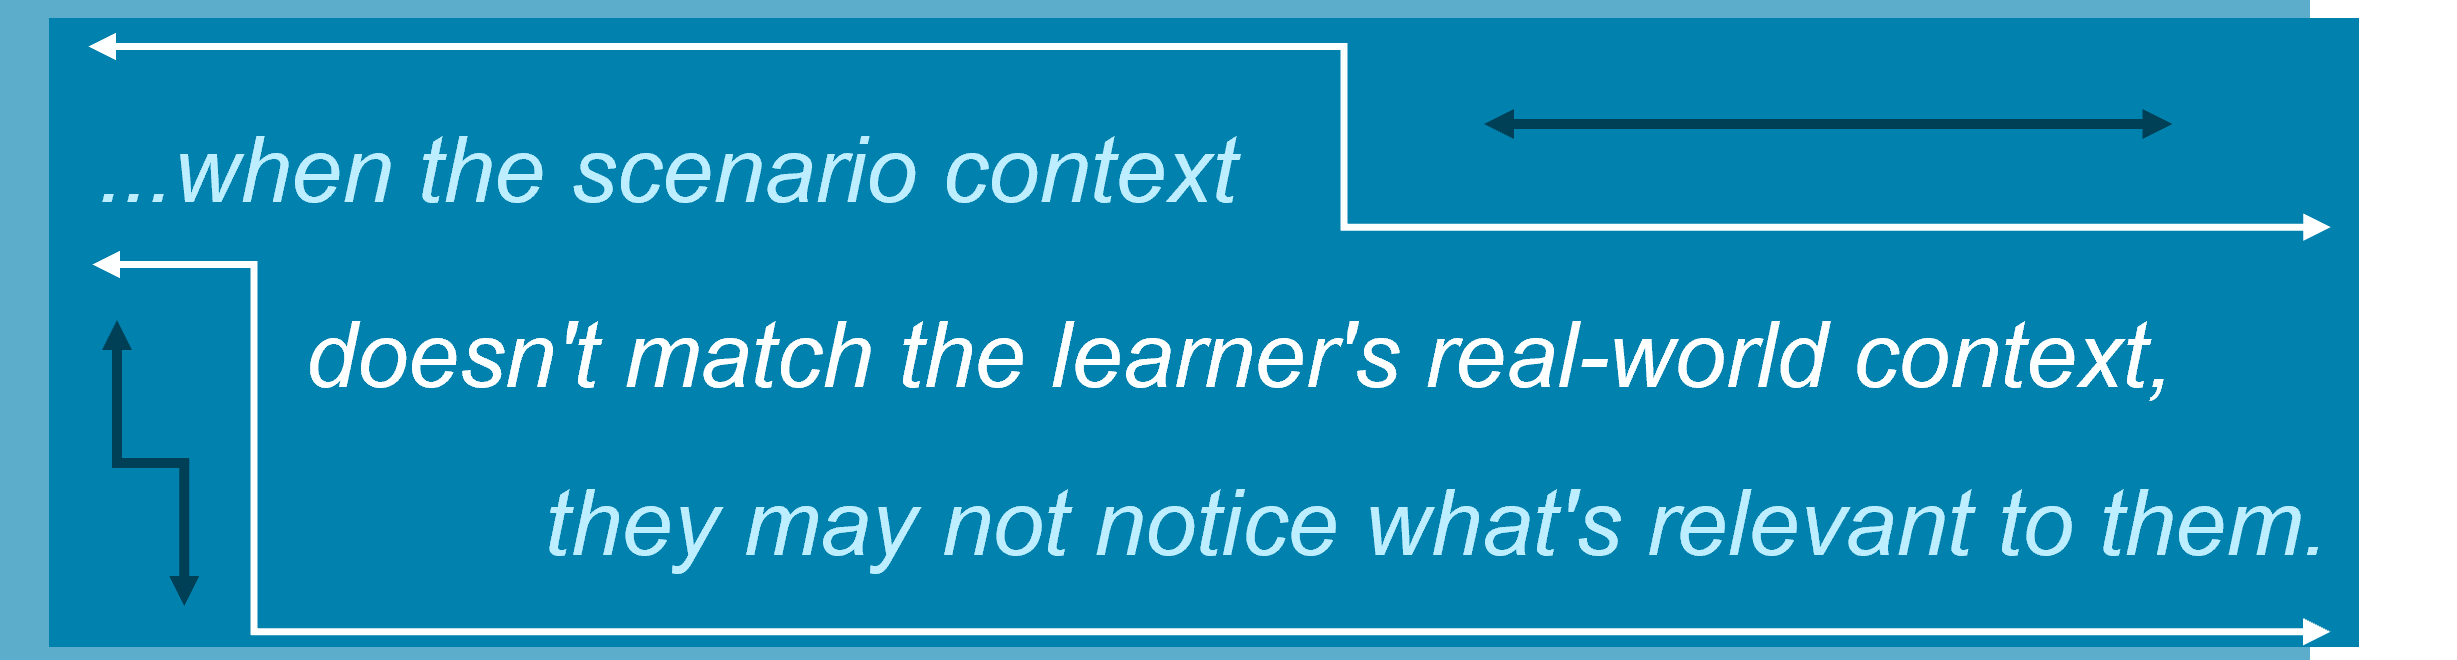 when the scenario context doesn't match the learner's real-world context, they may not notice what's relevant to them.